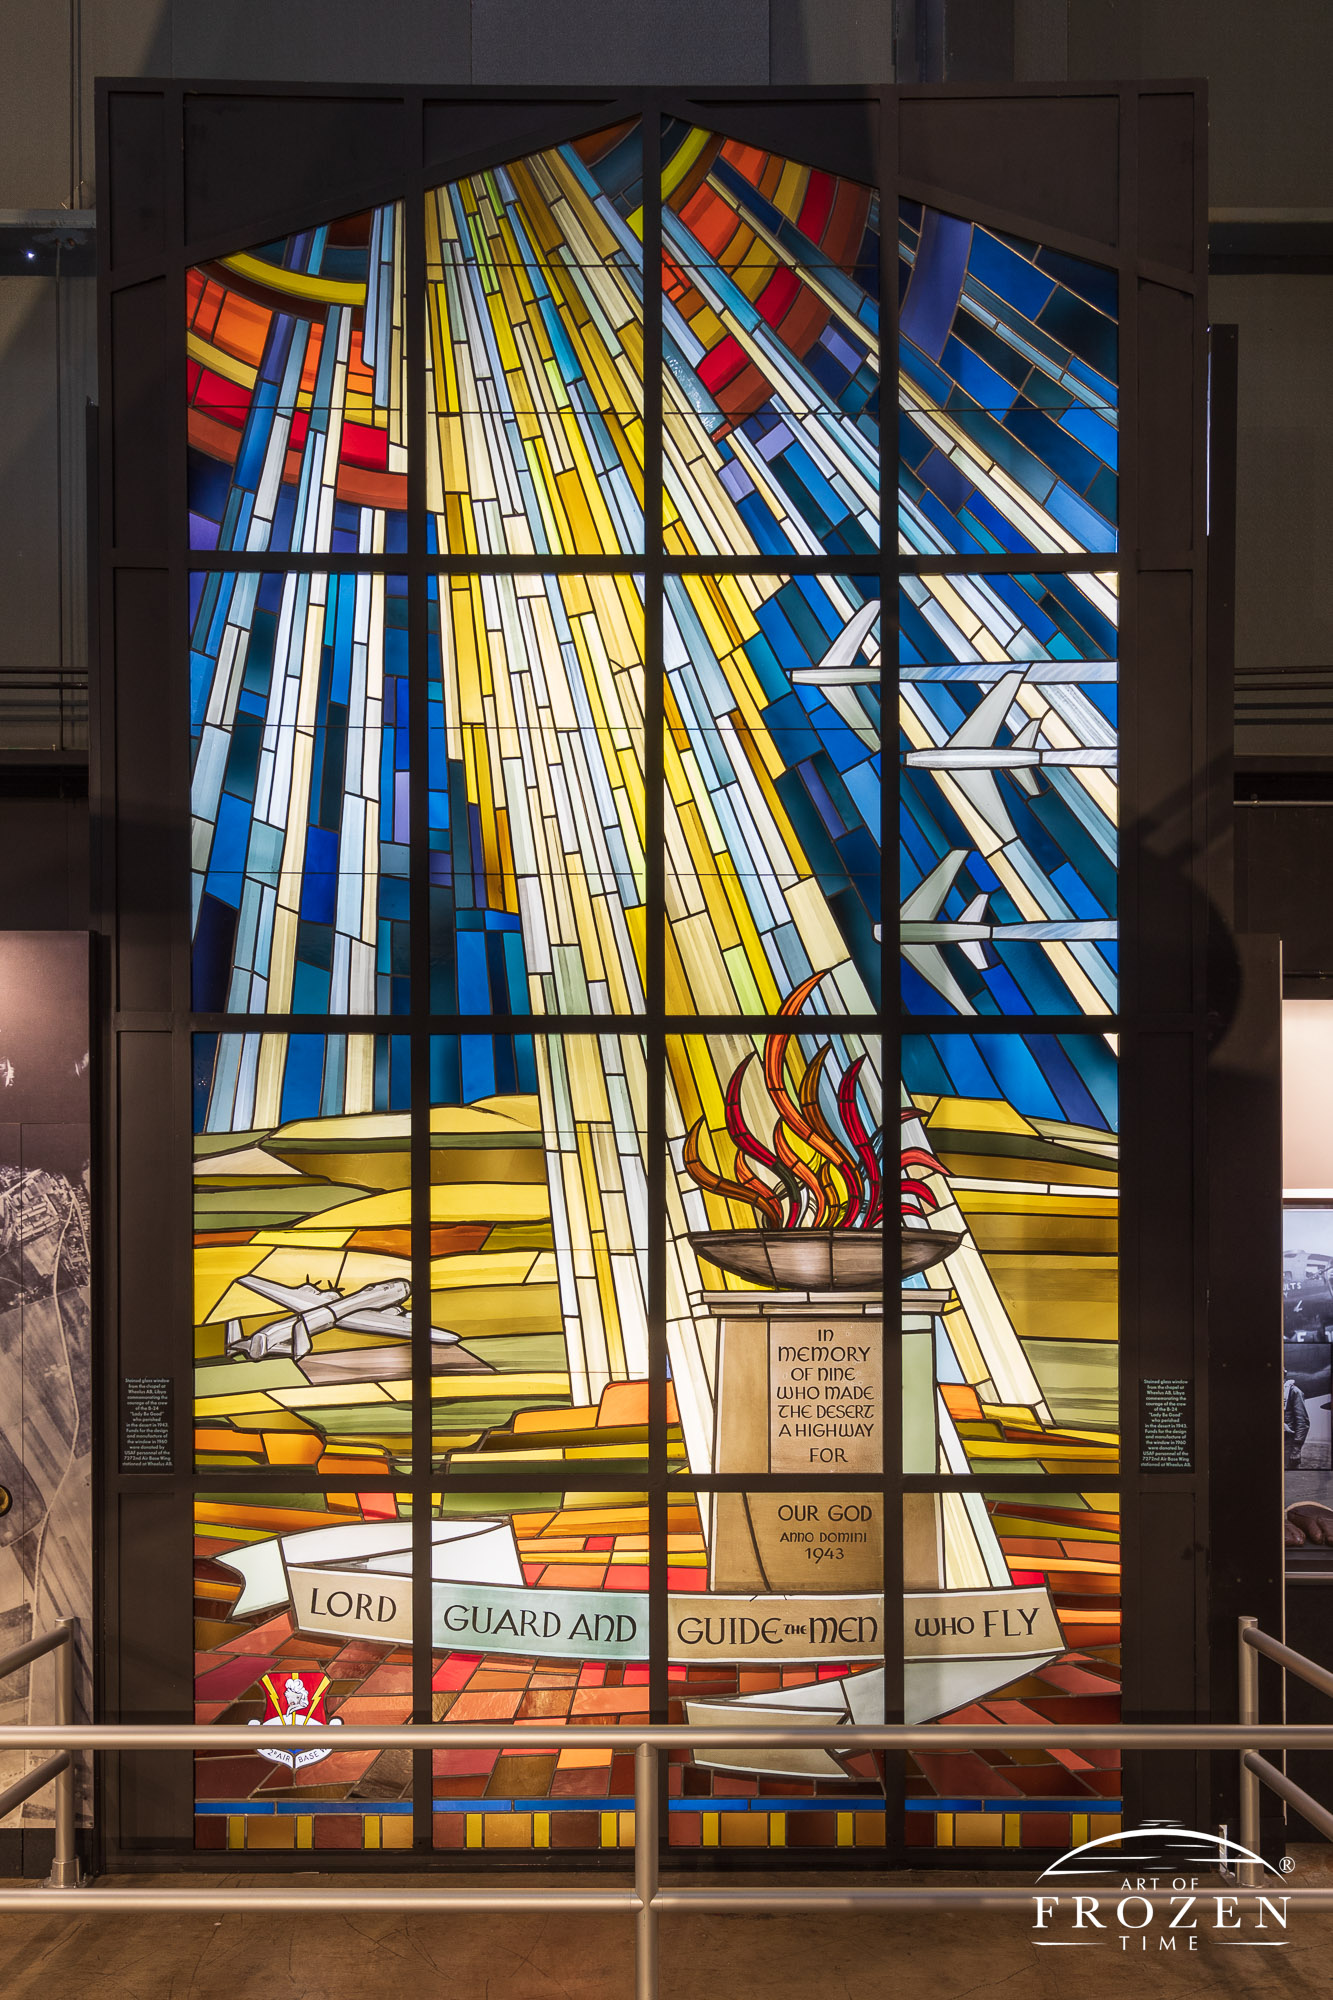 Stained-glass window at the AF Museum commemorating the lost crew of the “Lady Be Good”